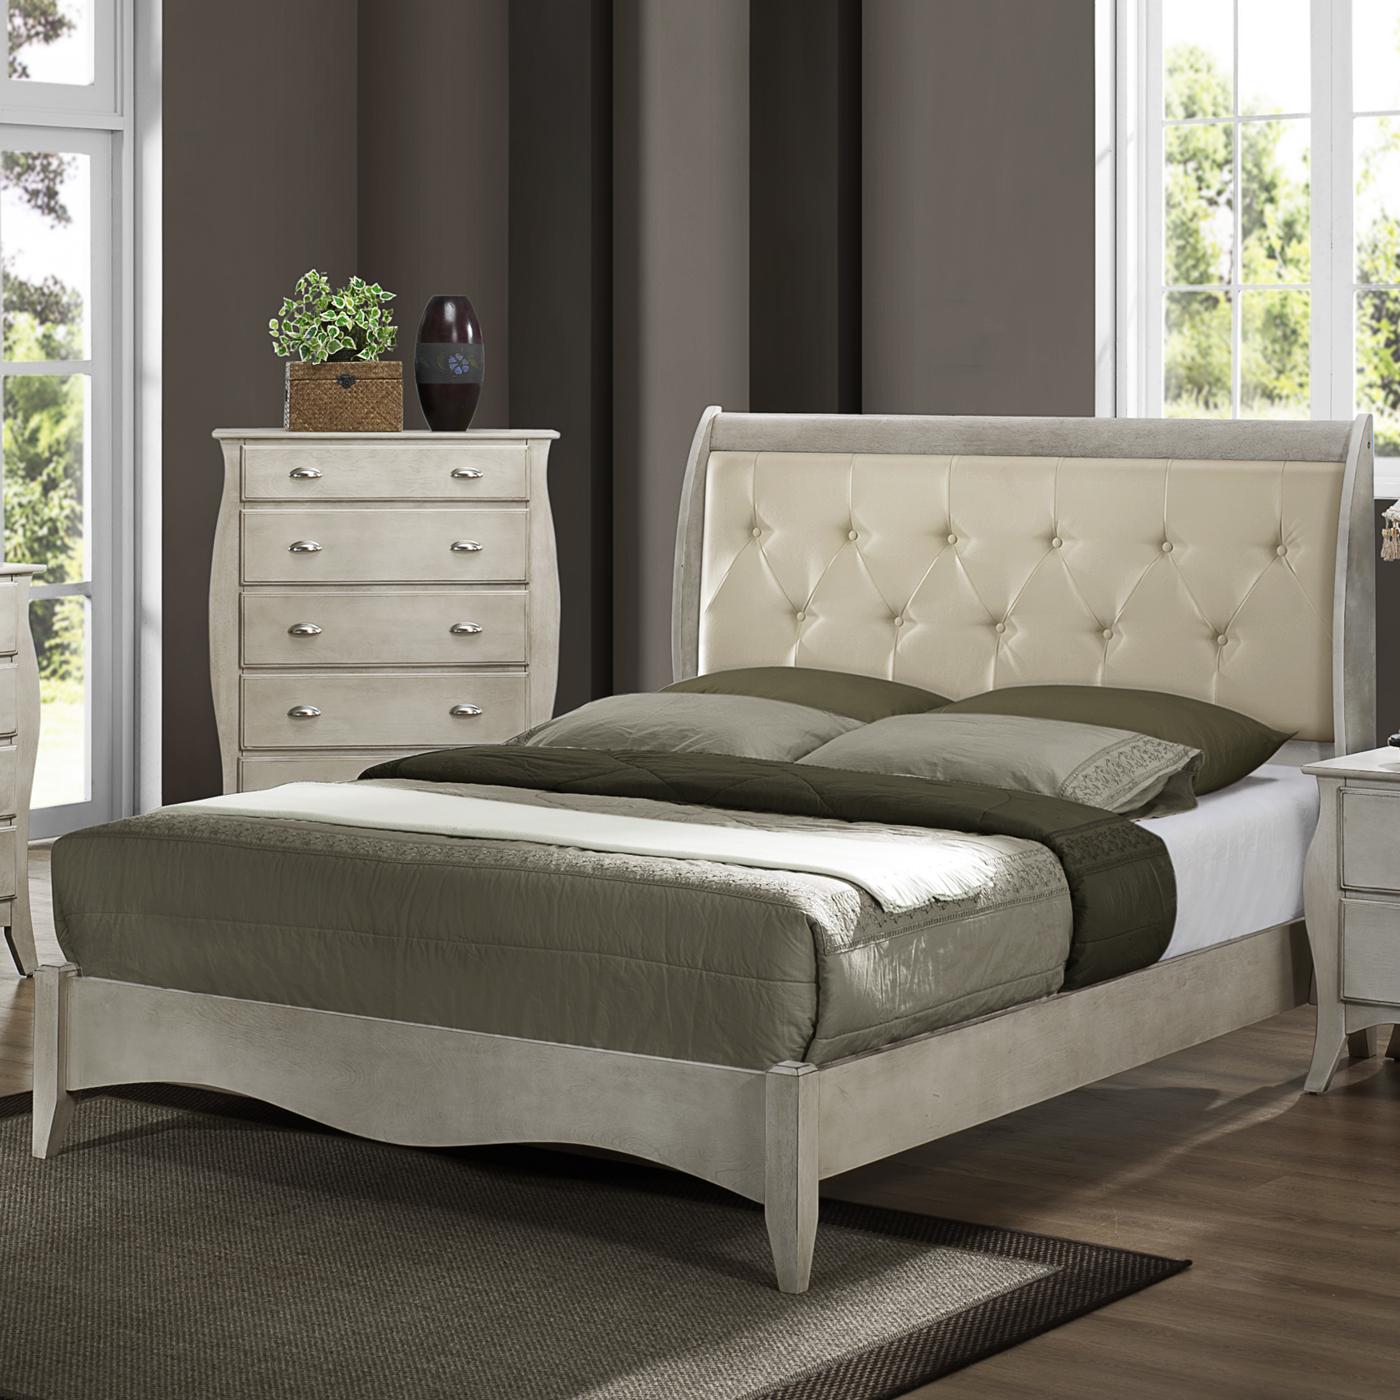 Best Way To Achieve Bed Furniture Stores A Sleek And ...